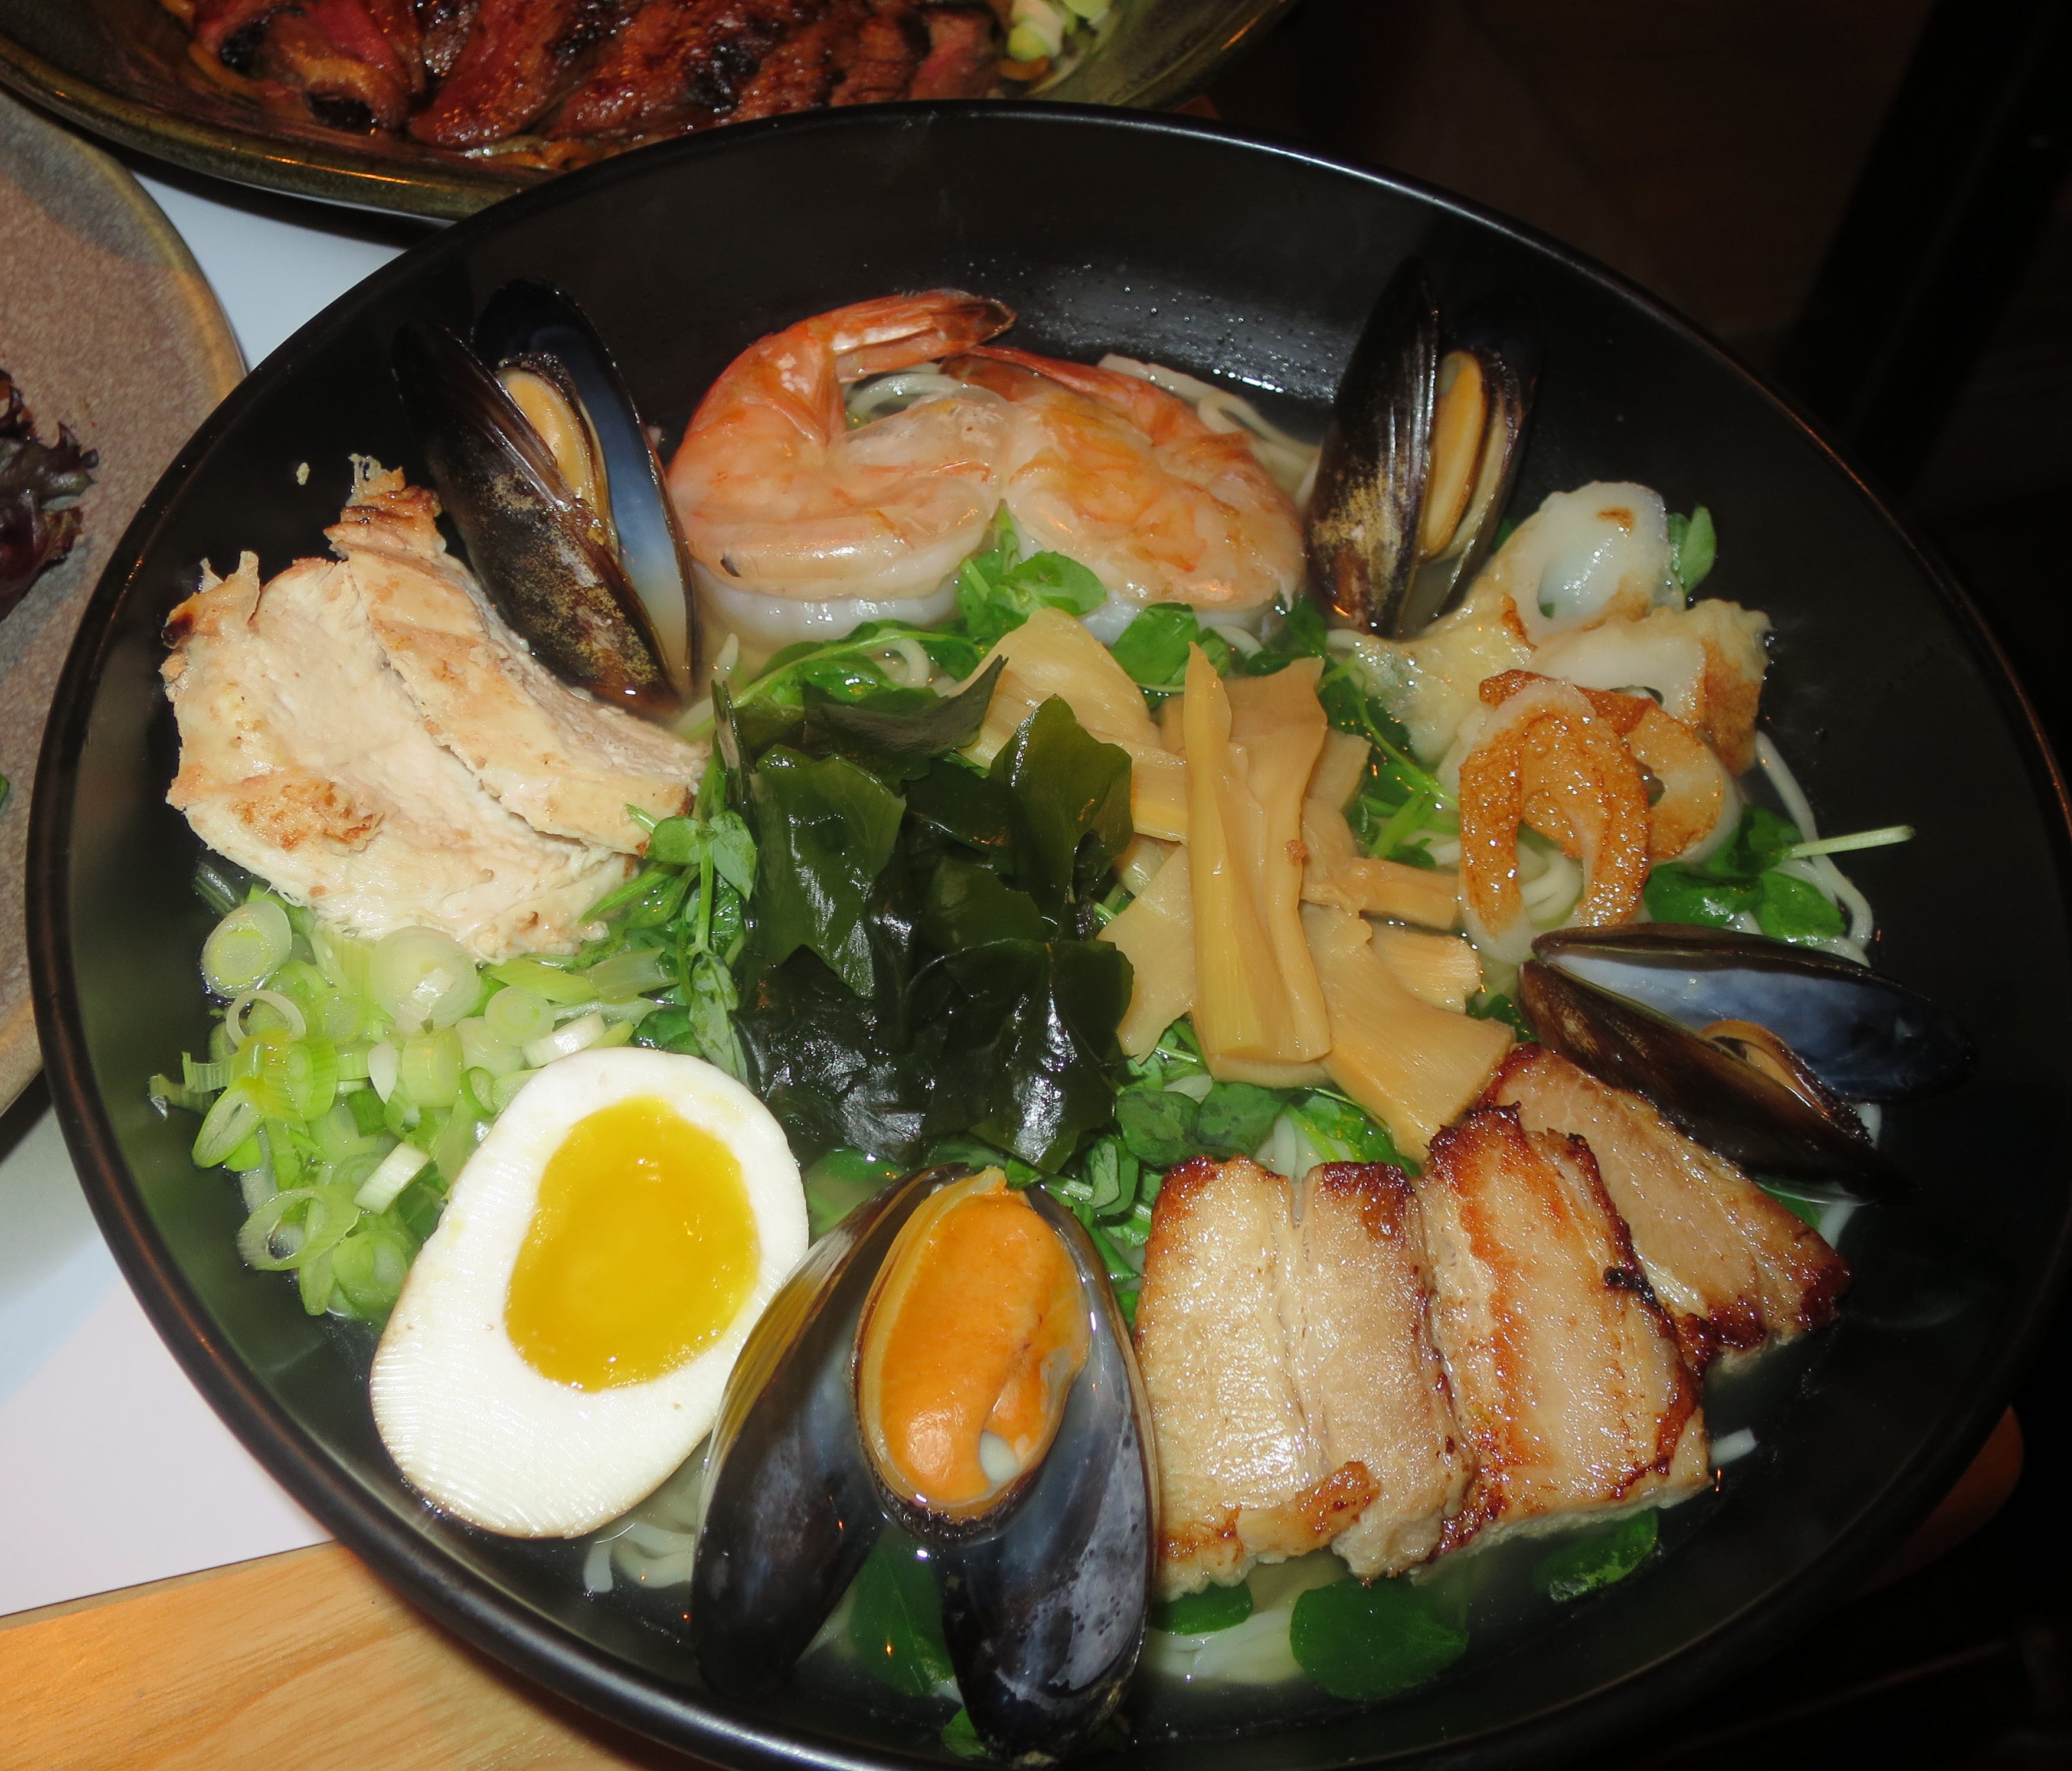 Ramen dishes are the bestsellers in the USA, and this is the namesake Wagamama ramen, with a little bit of everything: chicken, mussels, shell on shrimp, Japanese fish cake, pork belly, ramen noodles, scallions, pea shoots, seaweed, bamboo shoots and